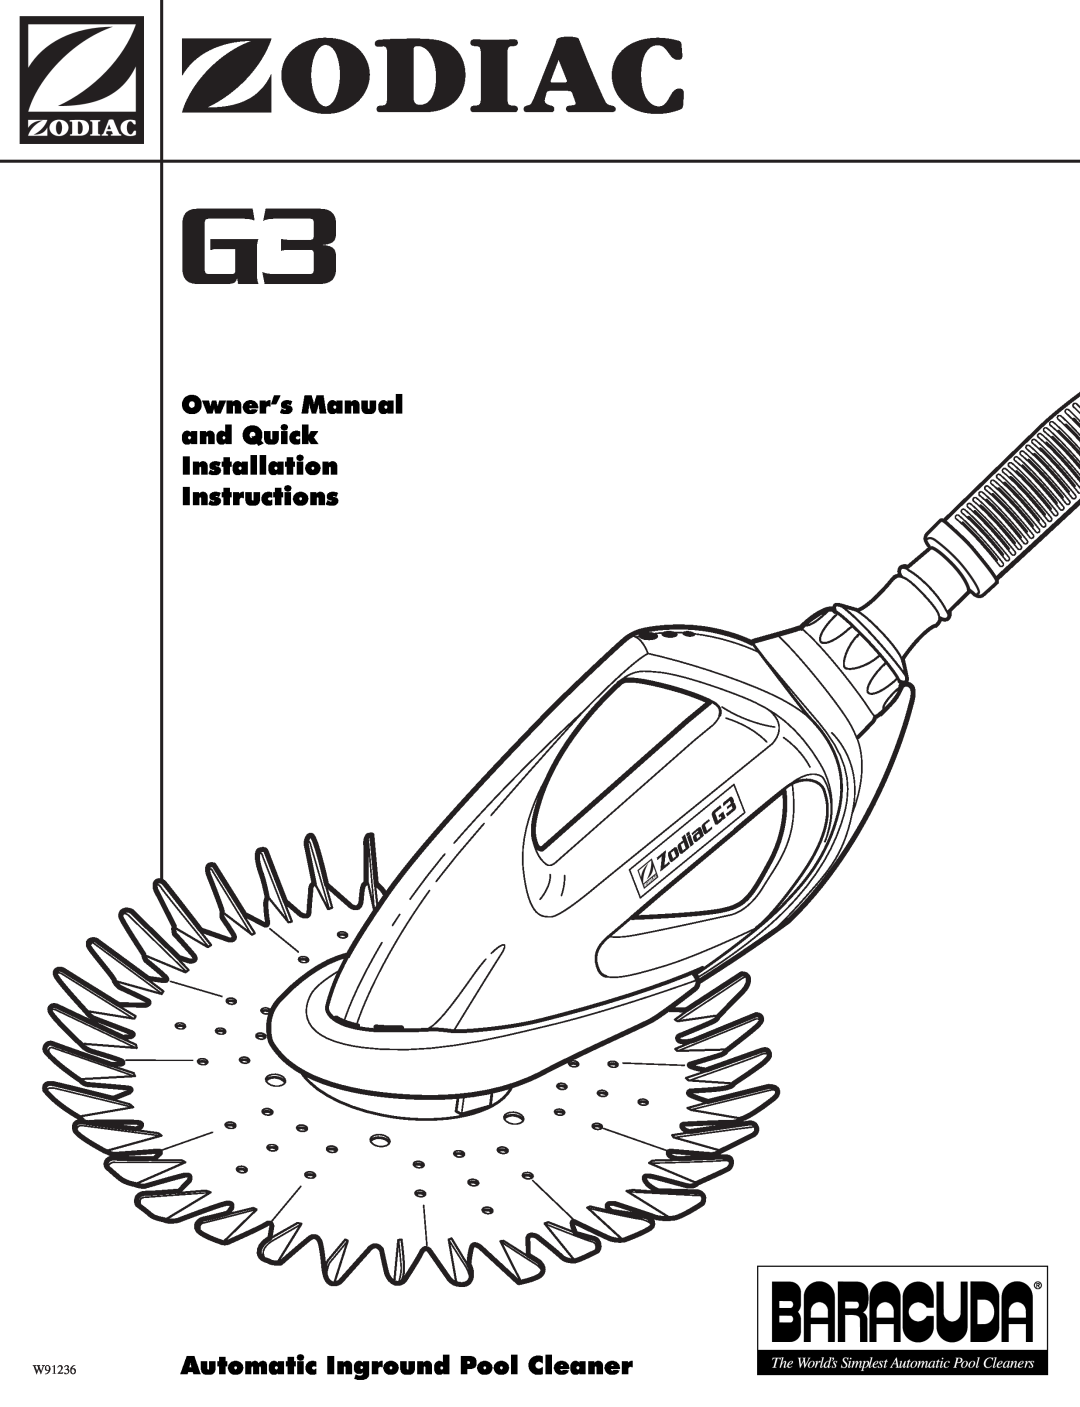 Baracoda G3 owner manual Owner’s Manual and Quick Installation Instructions, W91236Automatic Inground Pool Cleaner 